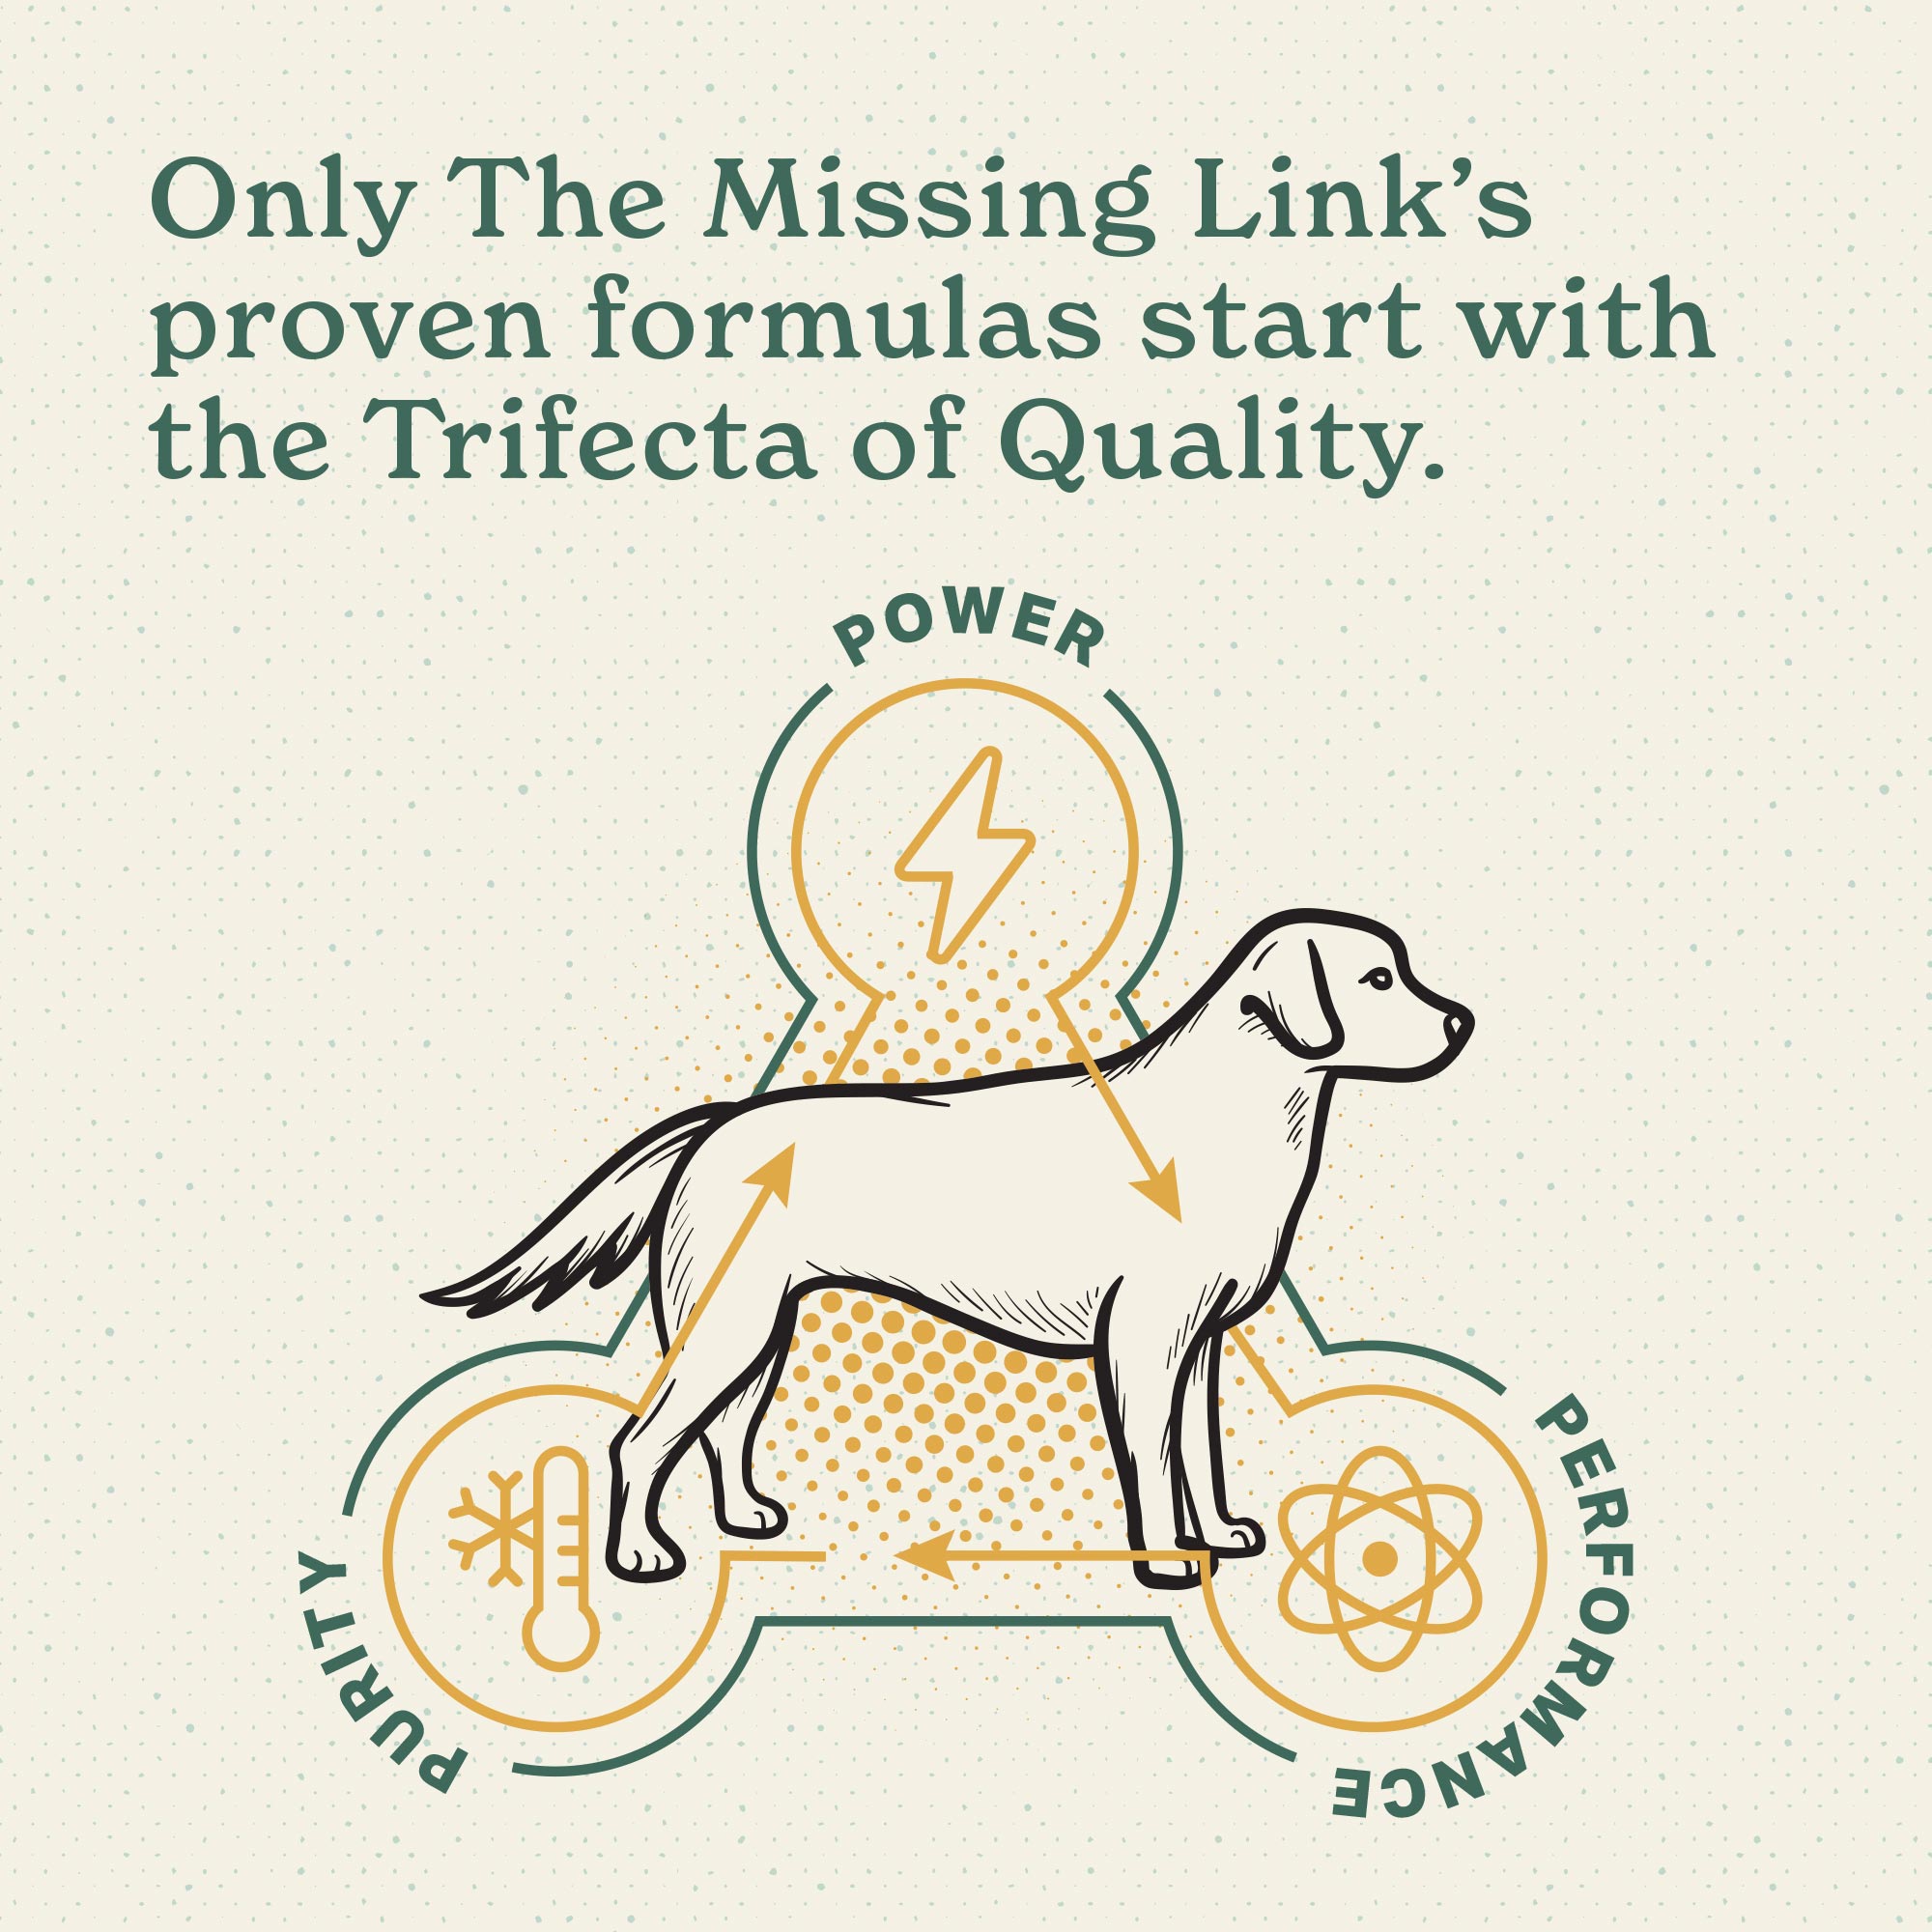 Only The Missing Link's proven formulas start with the Trifecta of Quality.